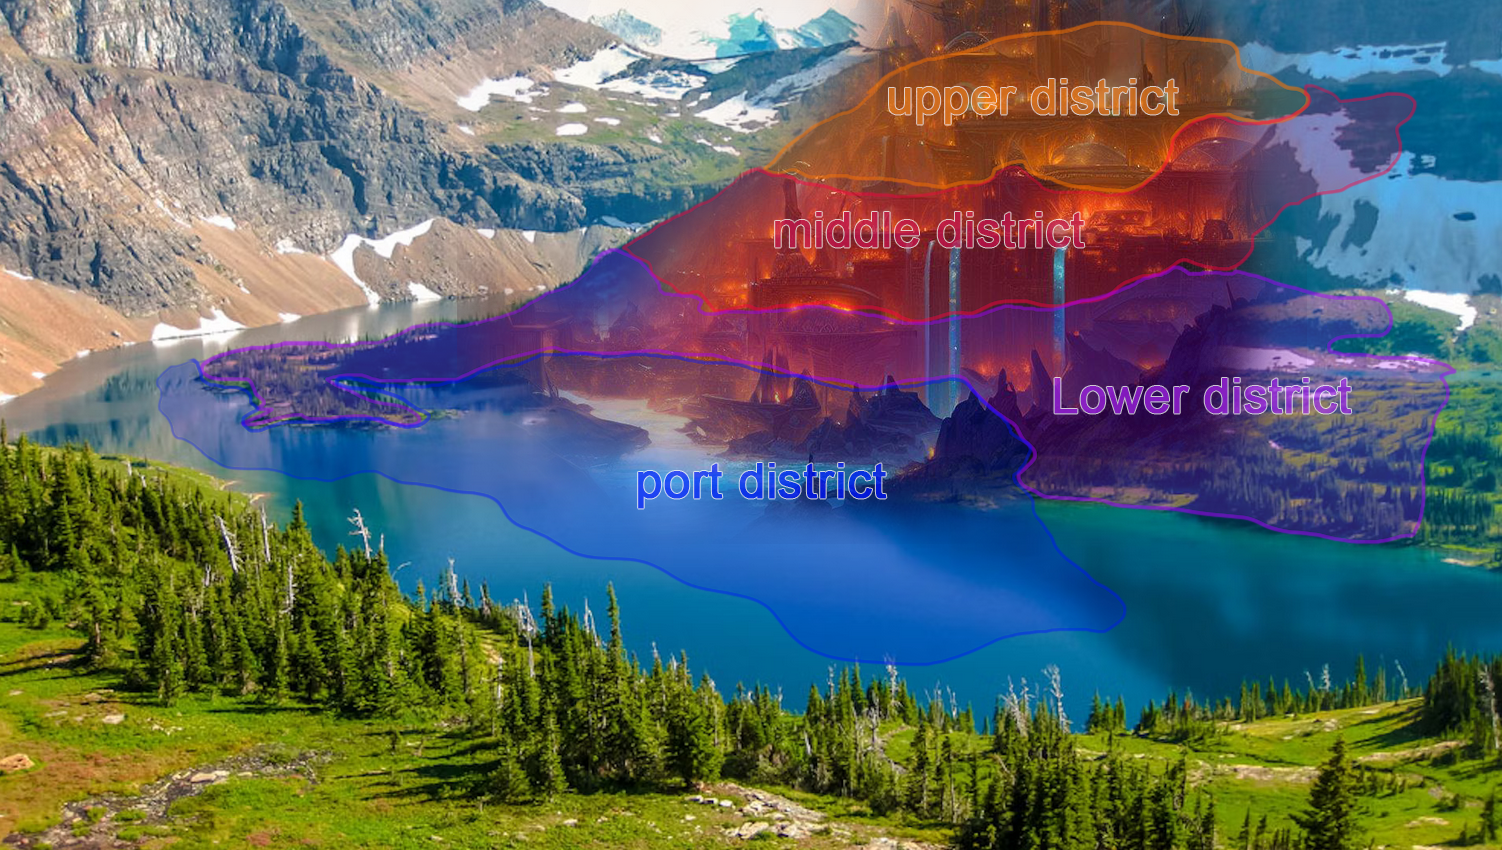 photoshopped image of a valley lake located in the mountains.